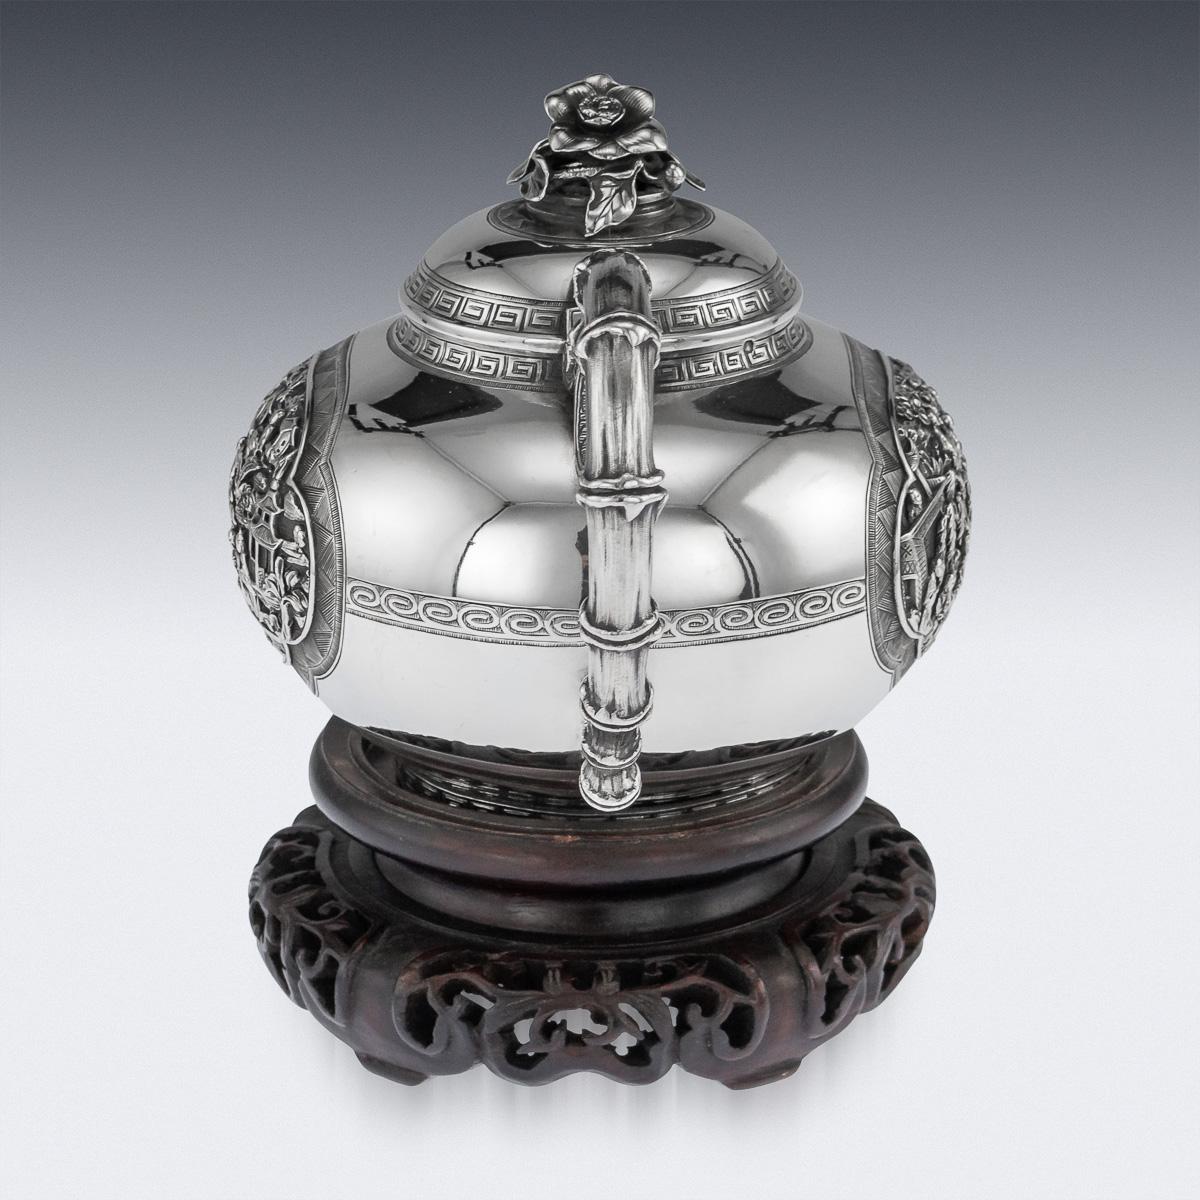 Antique 19th century exceptional Chinese export solid silver teapot, of round form resting on a flat base, the plain body applied with finely and profusely chased panels with figures in a landscape, surrounded by cross-key boarders, the handle and